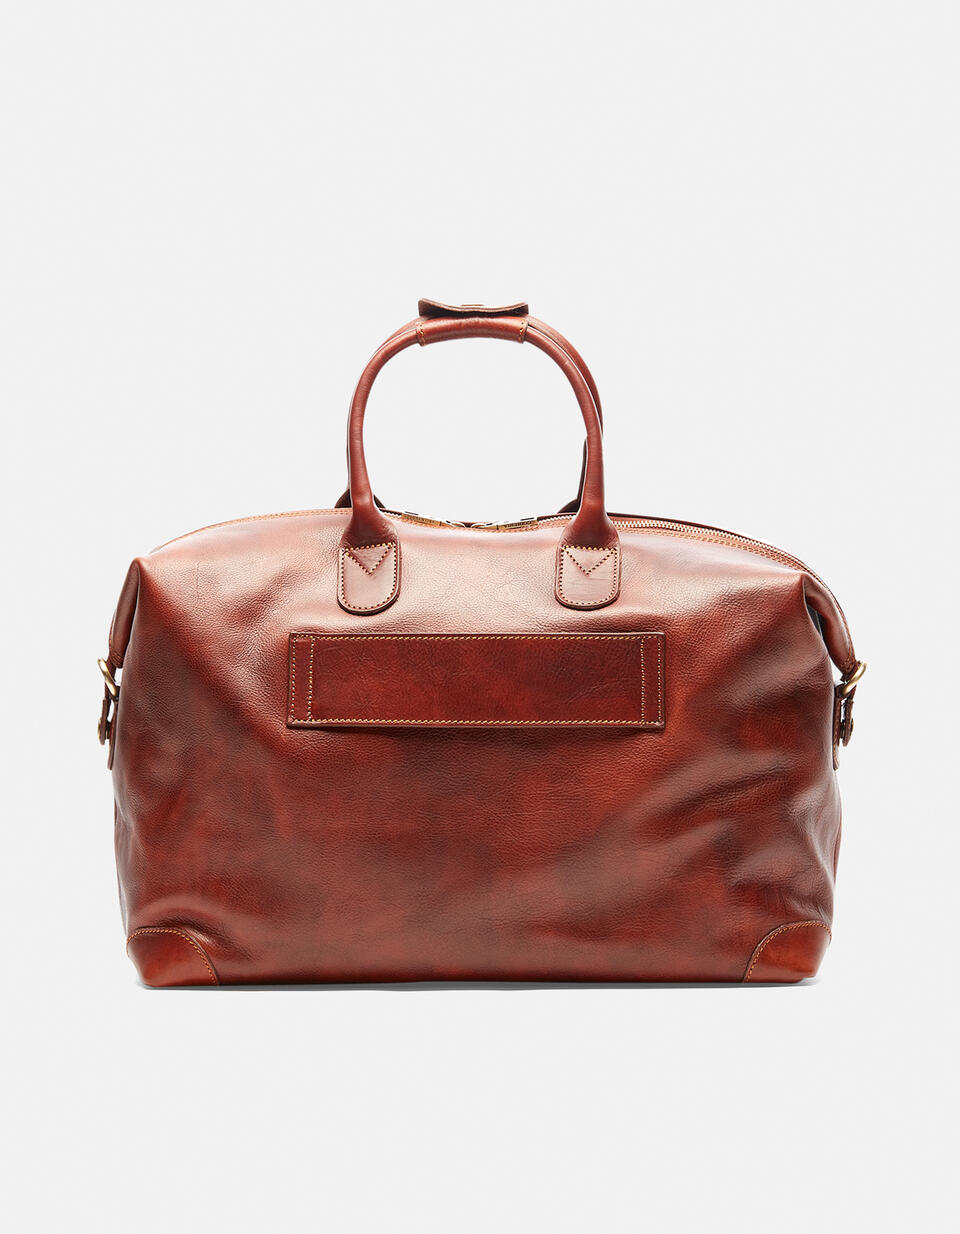 Oxford weekender - Luggage | TRAVEL BAGS  - Luggage | TRAVEL BAGSCuoieria Fiorentina